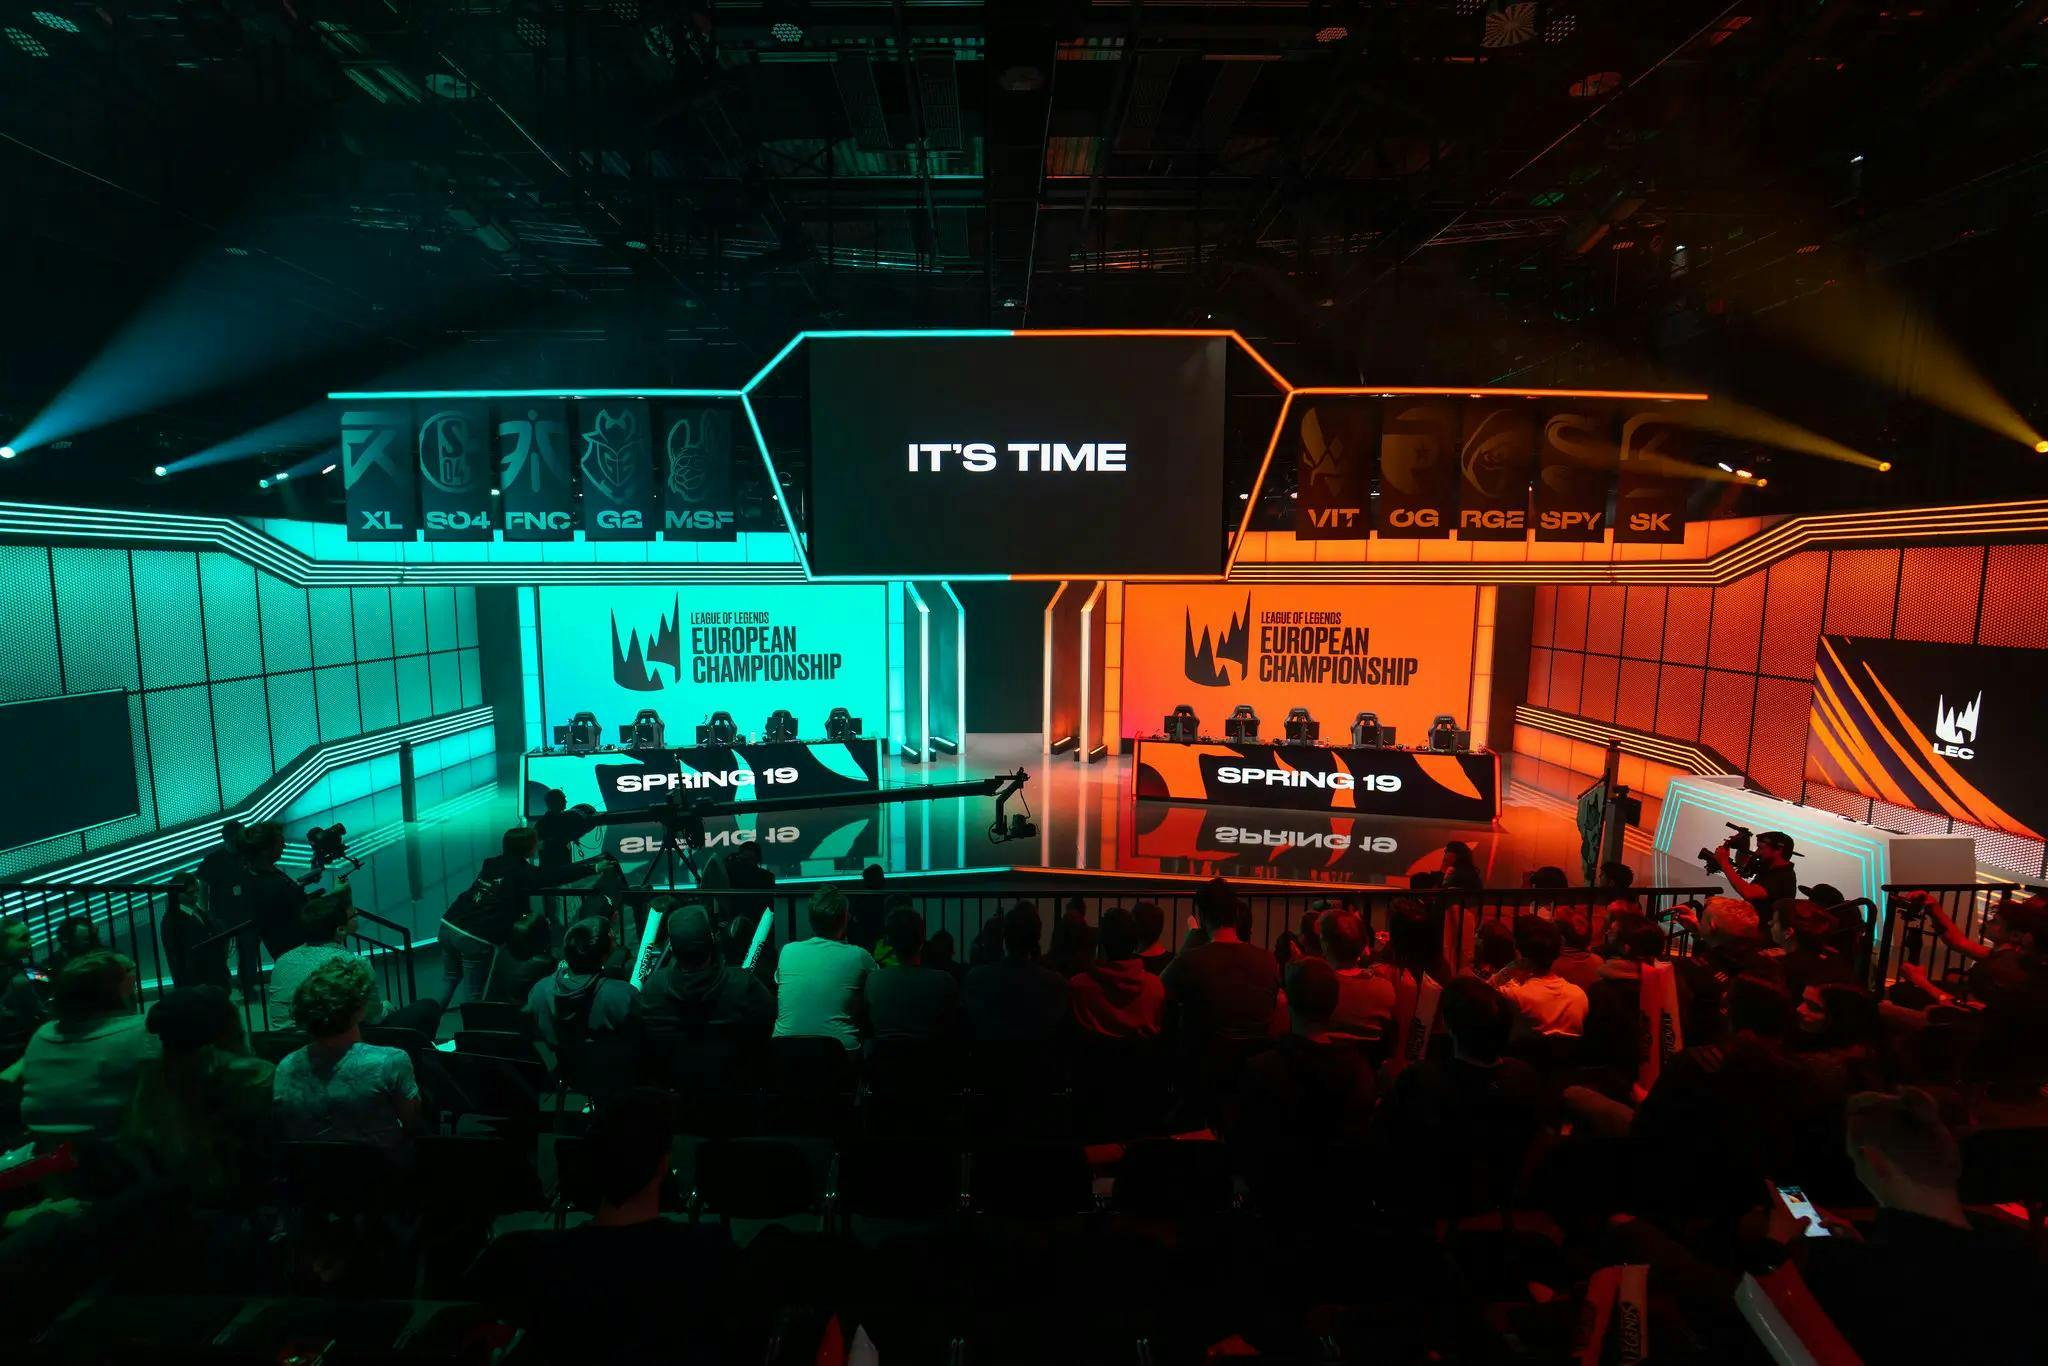 The LEC Studio, opened in 2019, has changed significantly since. Credit: Riot Games